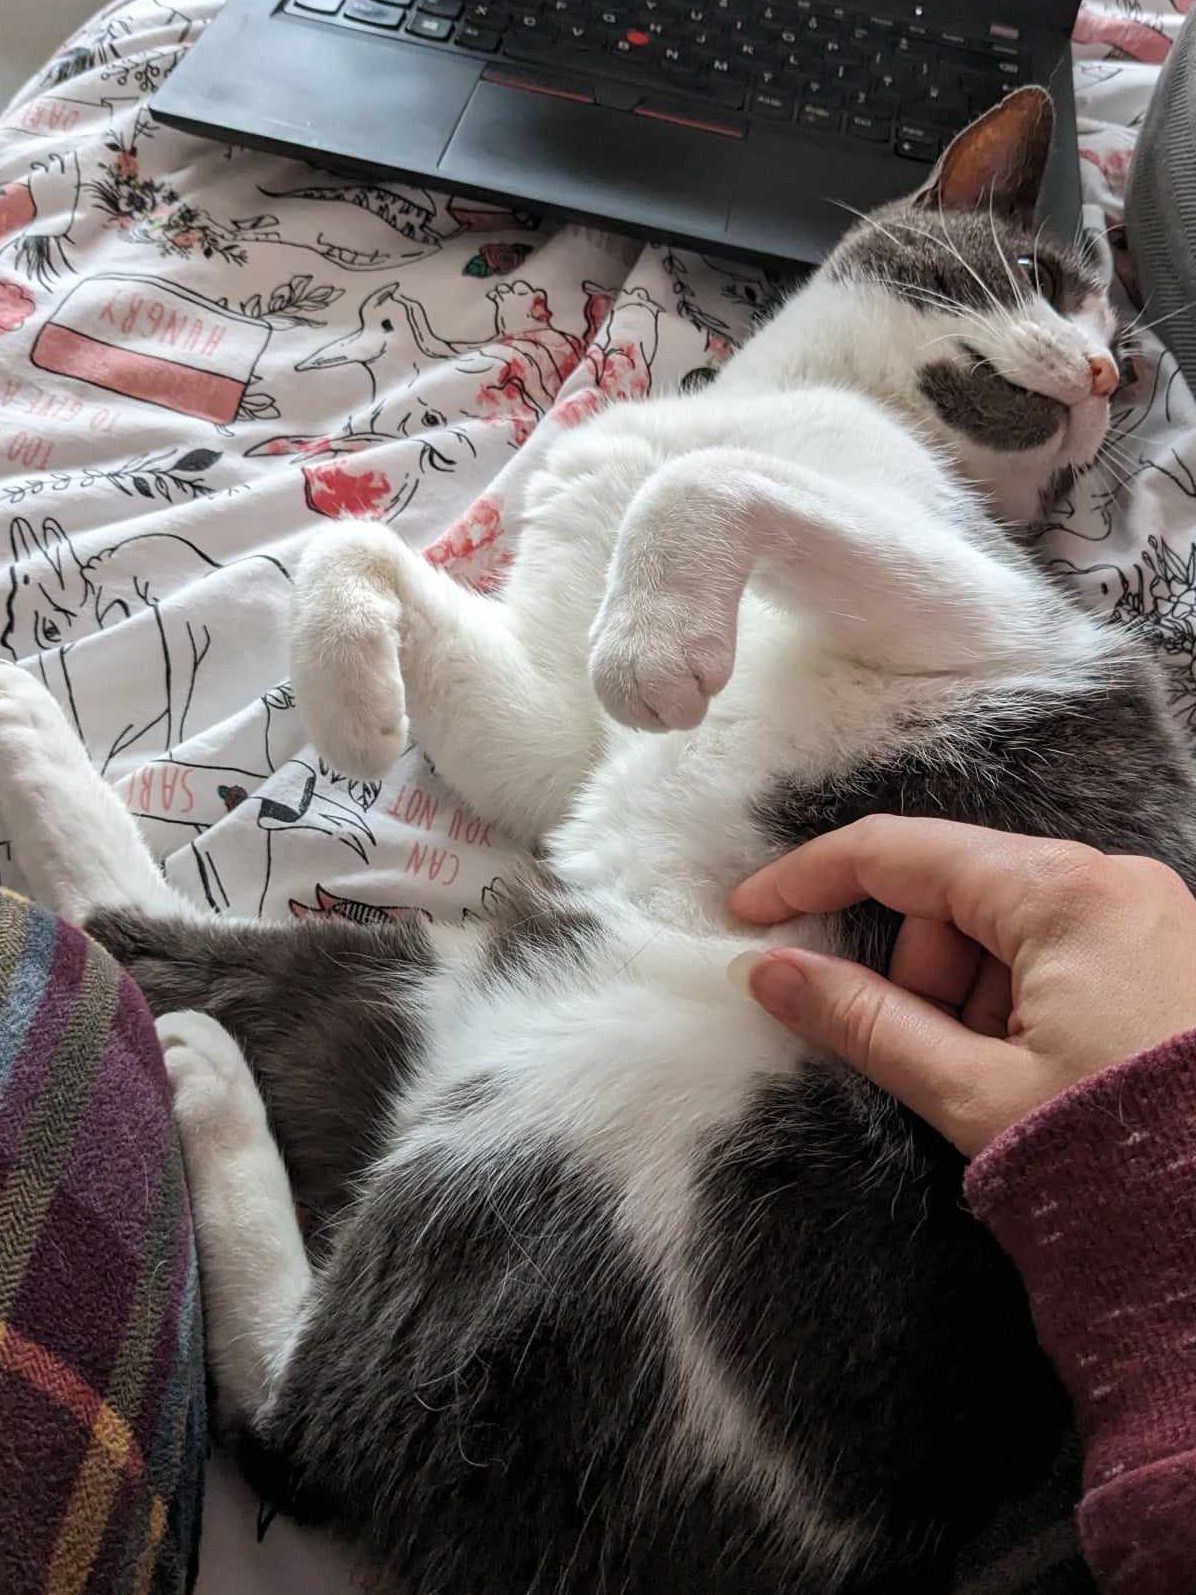 Our grey and white cat lying on his back to get belly rubs.